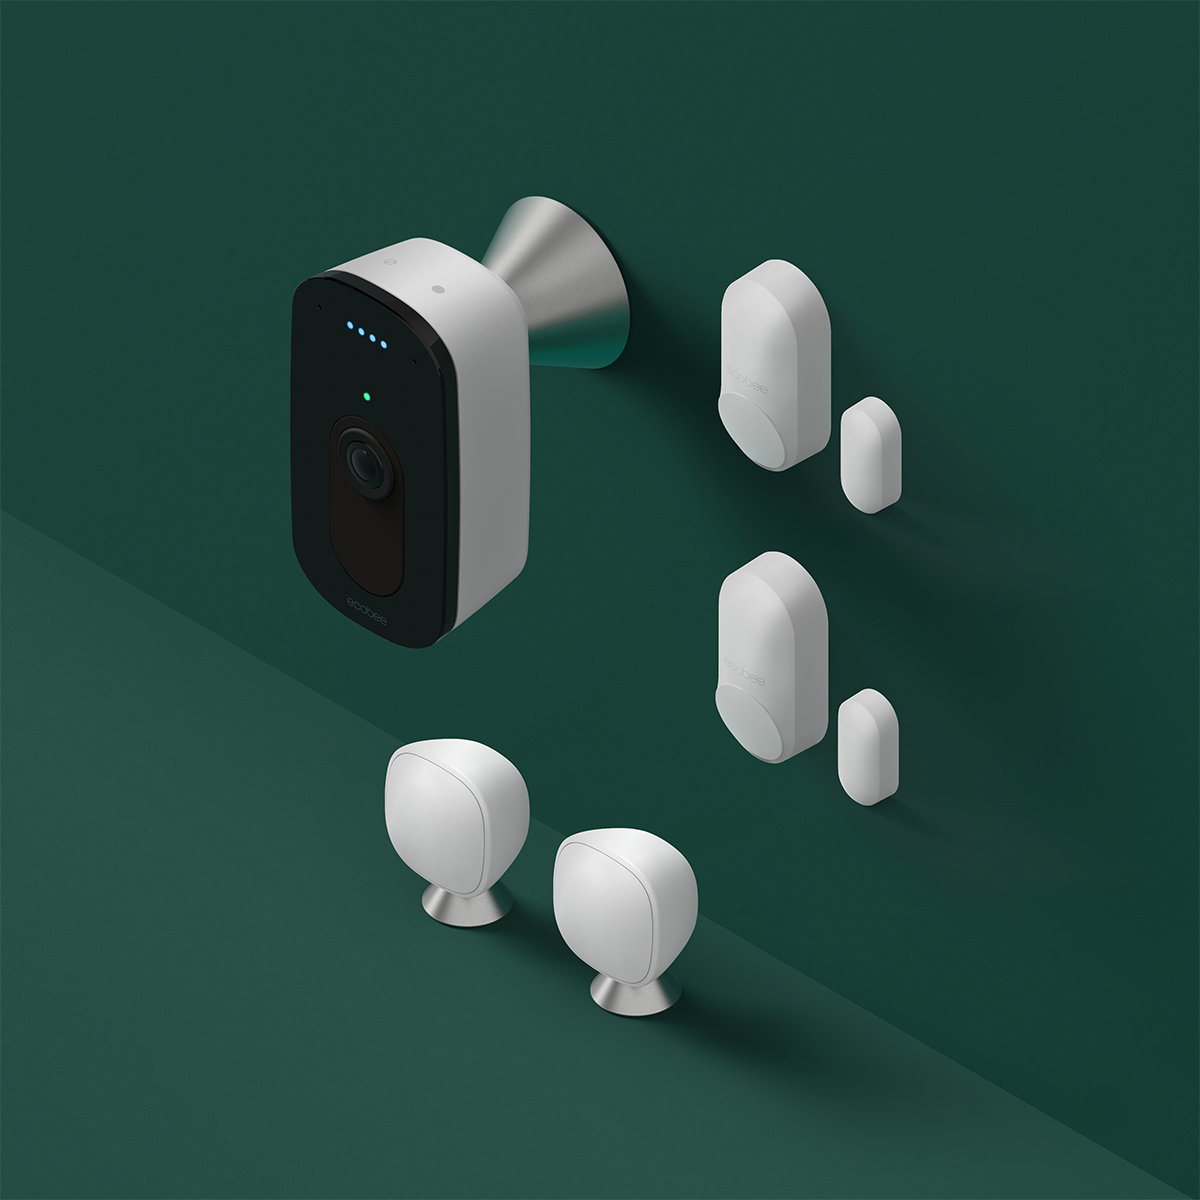 ecobee SmartCamera with voice control, with 2 SmartSensors and 2 SmartSensors for doors and windows.